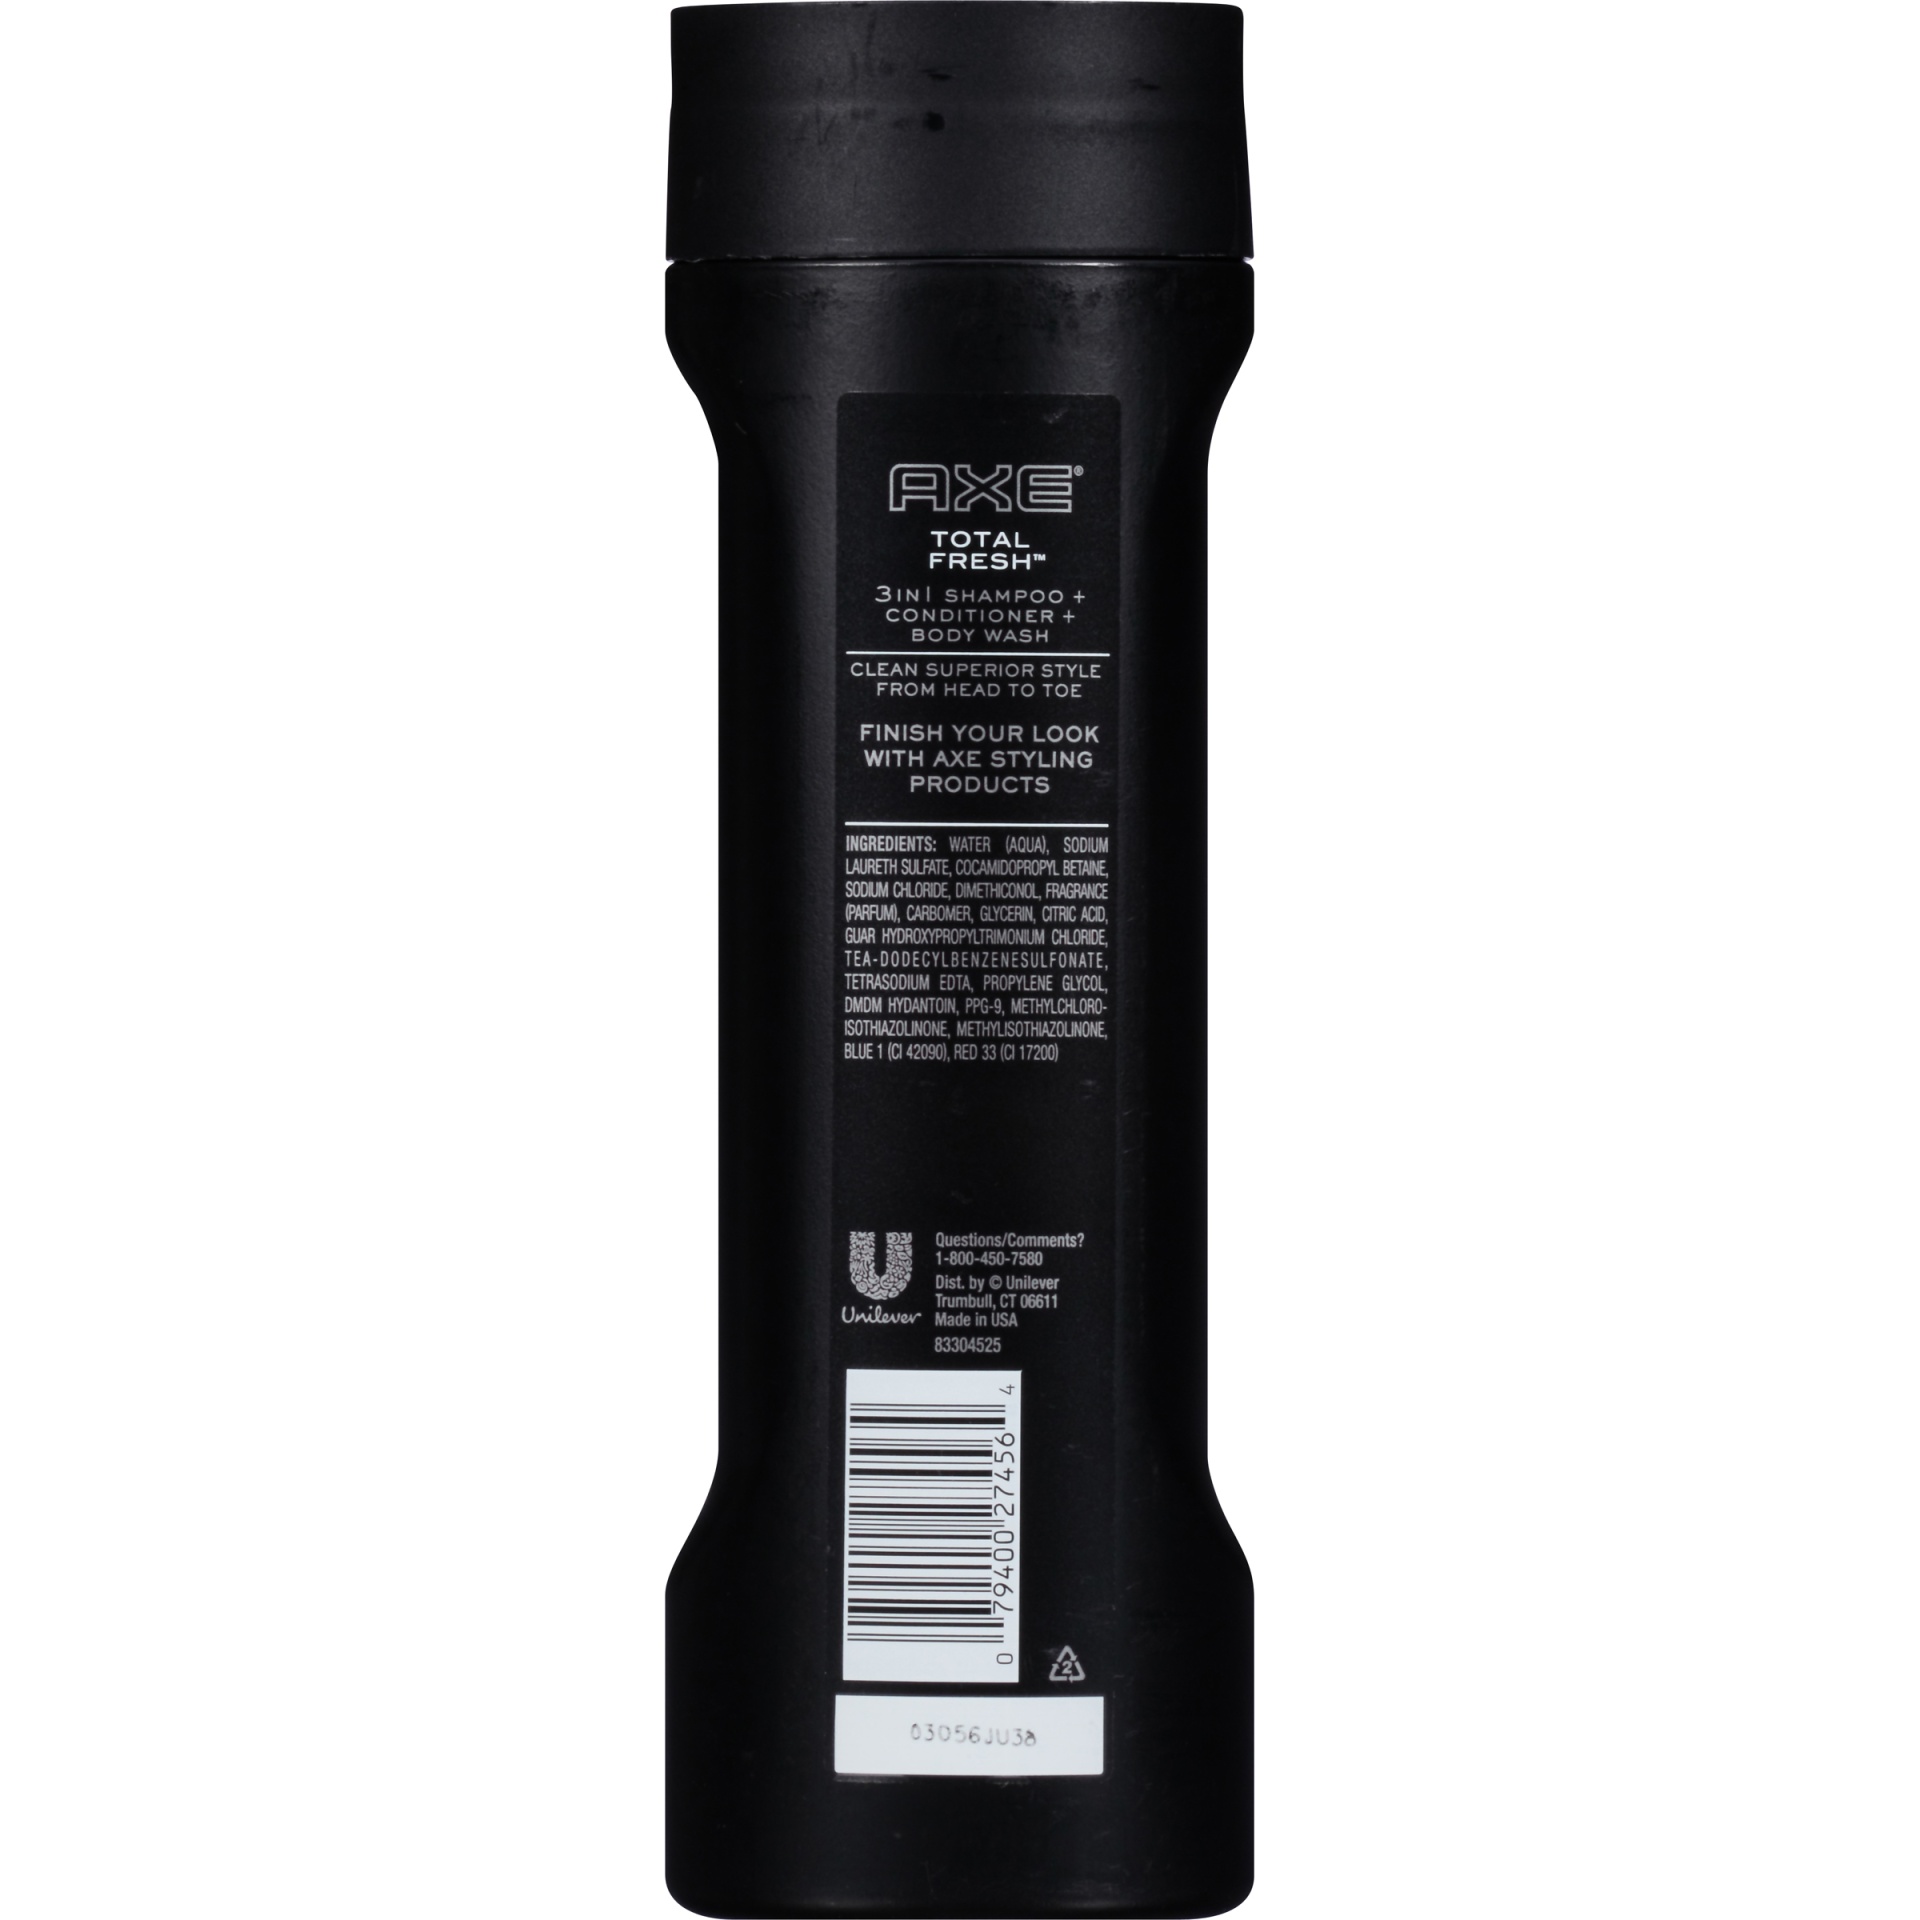 slide 5 of 6, AXE Total Fresh 3 In 1 Shampoo Conditioner And Body Wash, 12 fl oz